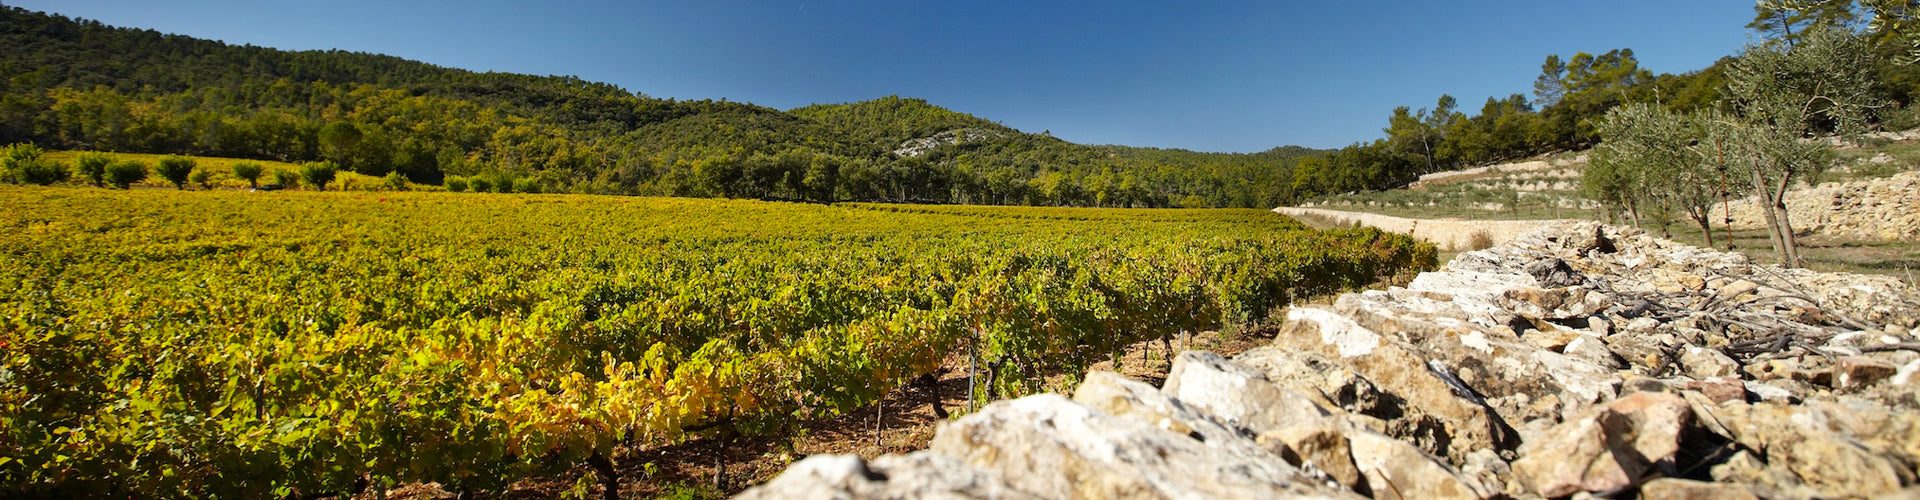 Château Miraval Vineyards in Provence